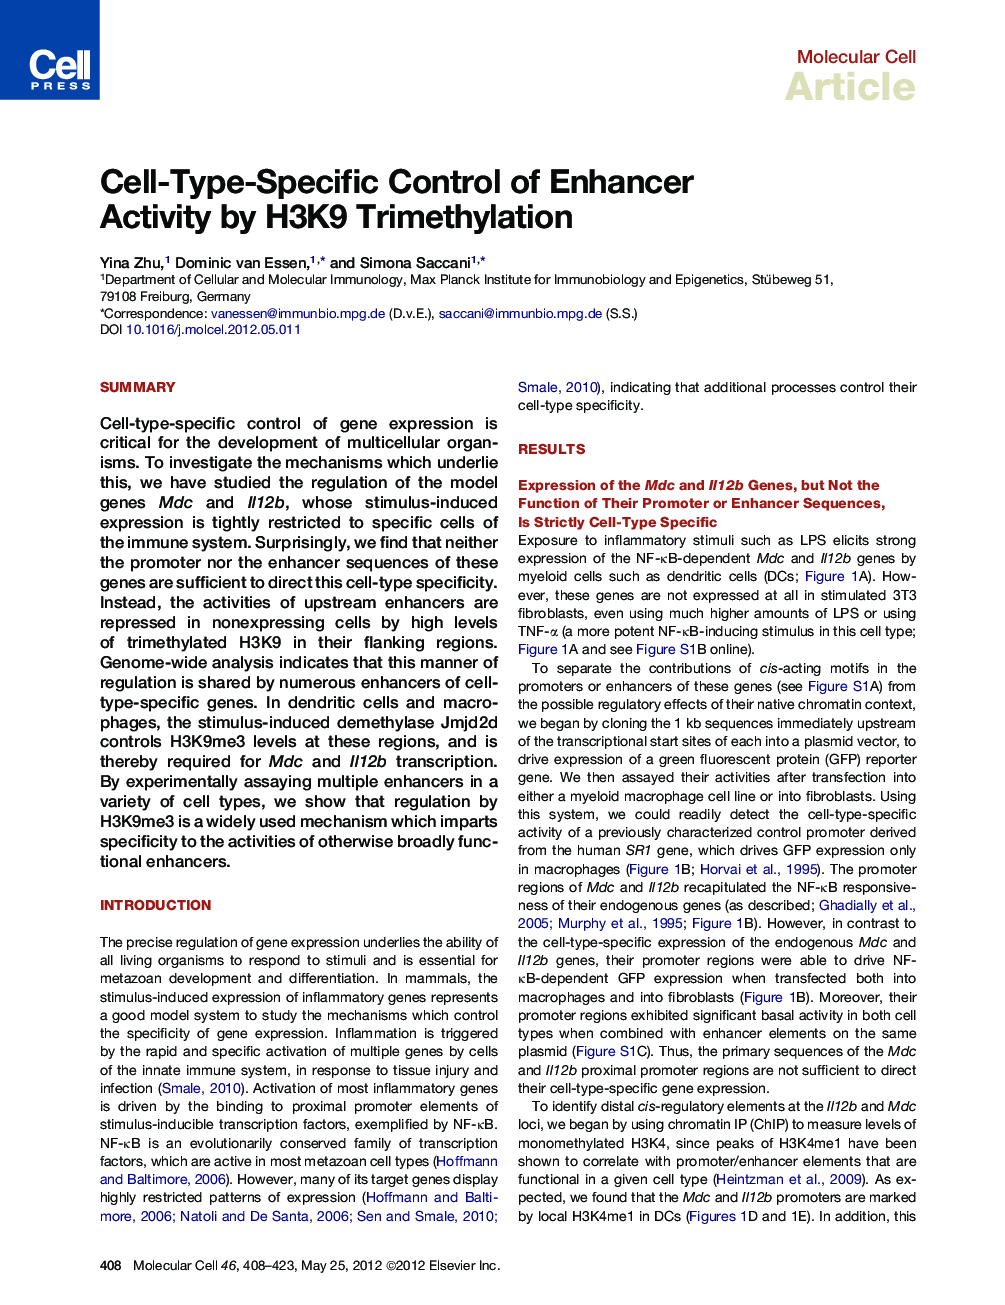 Cell-Type-Specific Control of Enhancer Activity by H3K9 Trimethylation